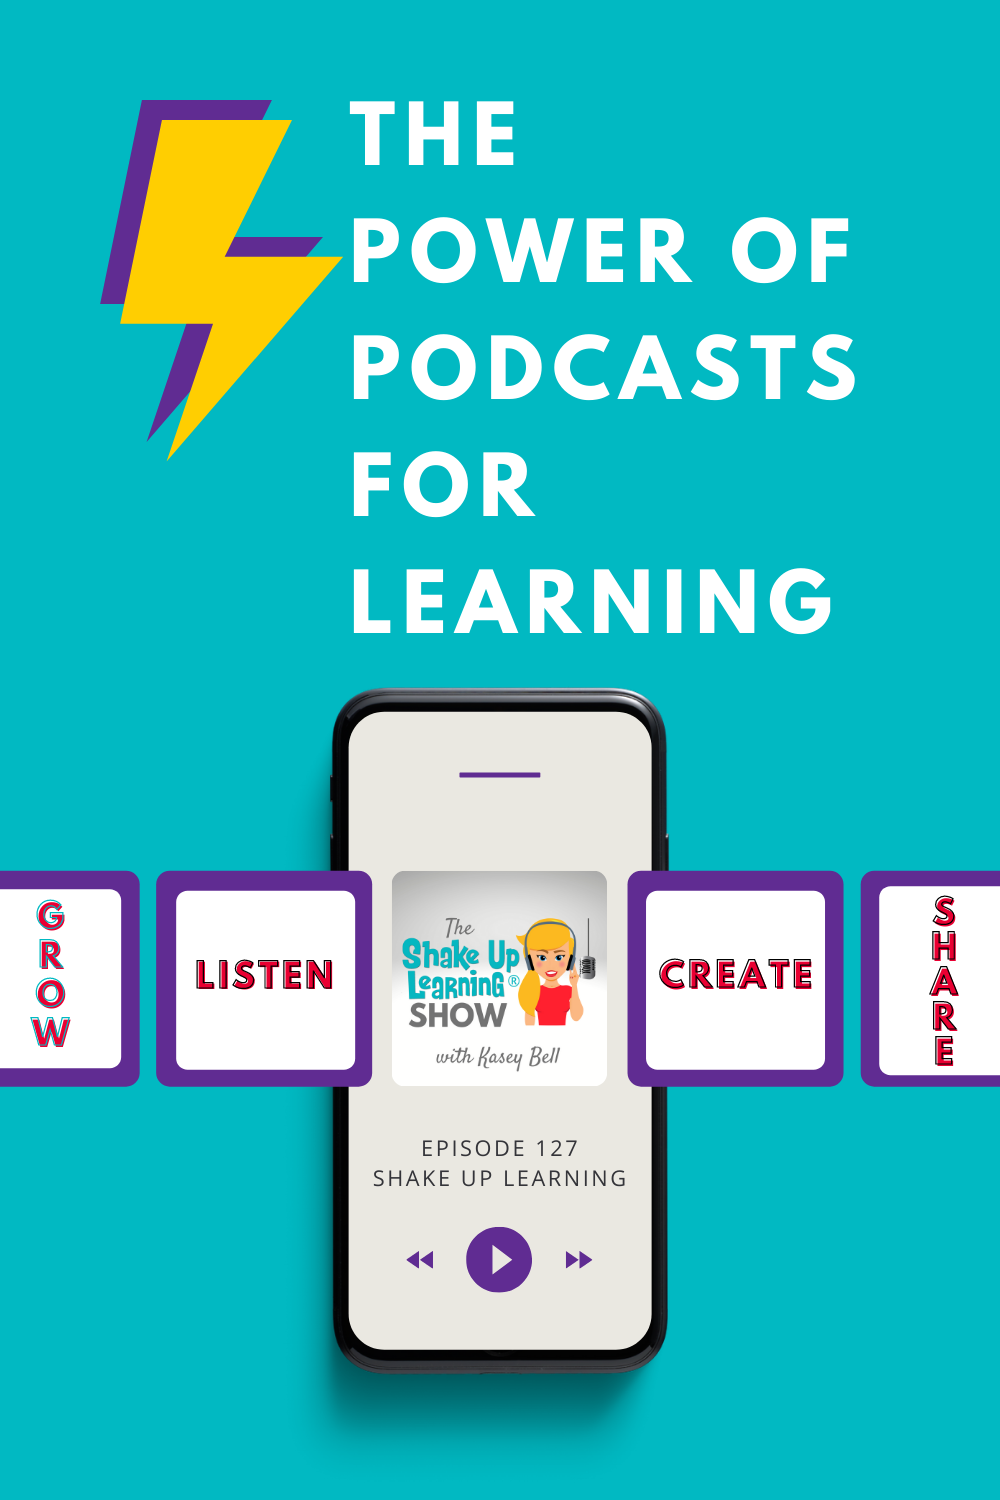 The Power of Podcasts for Learning: Listening, Creating, Sharing, and Growth – SULS0127